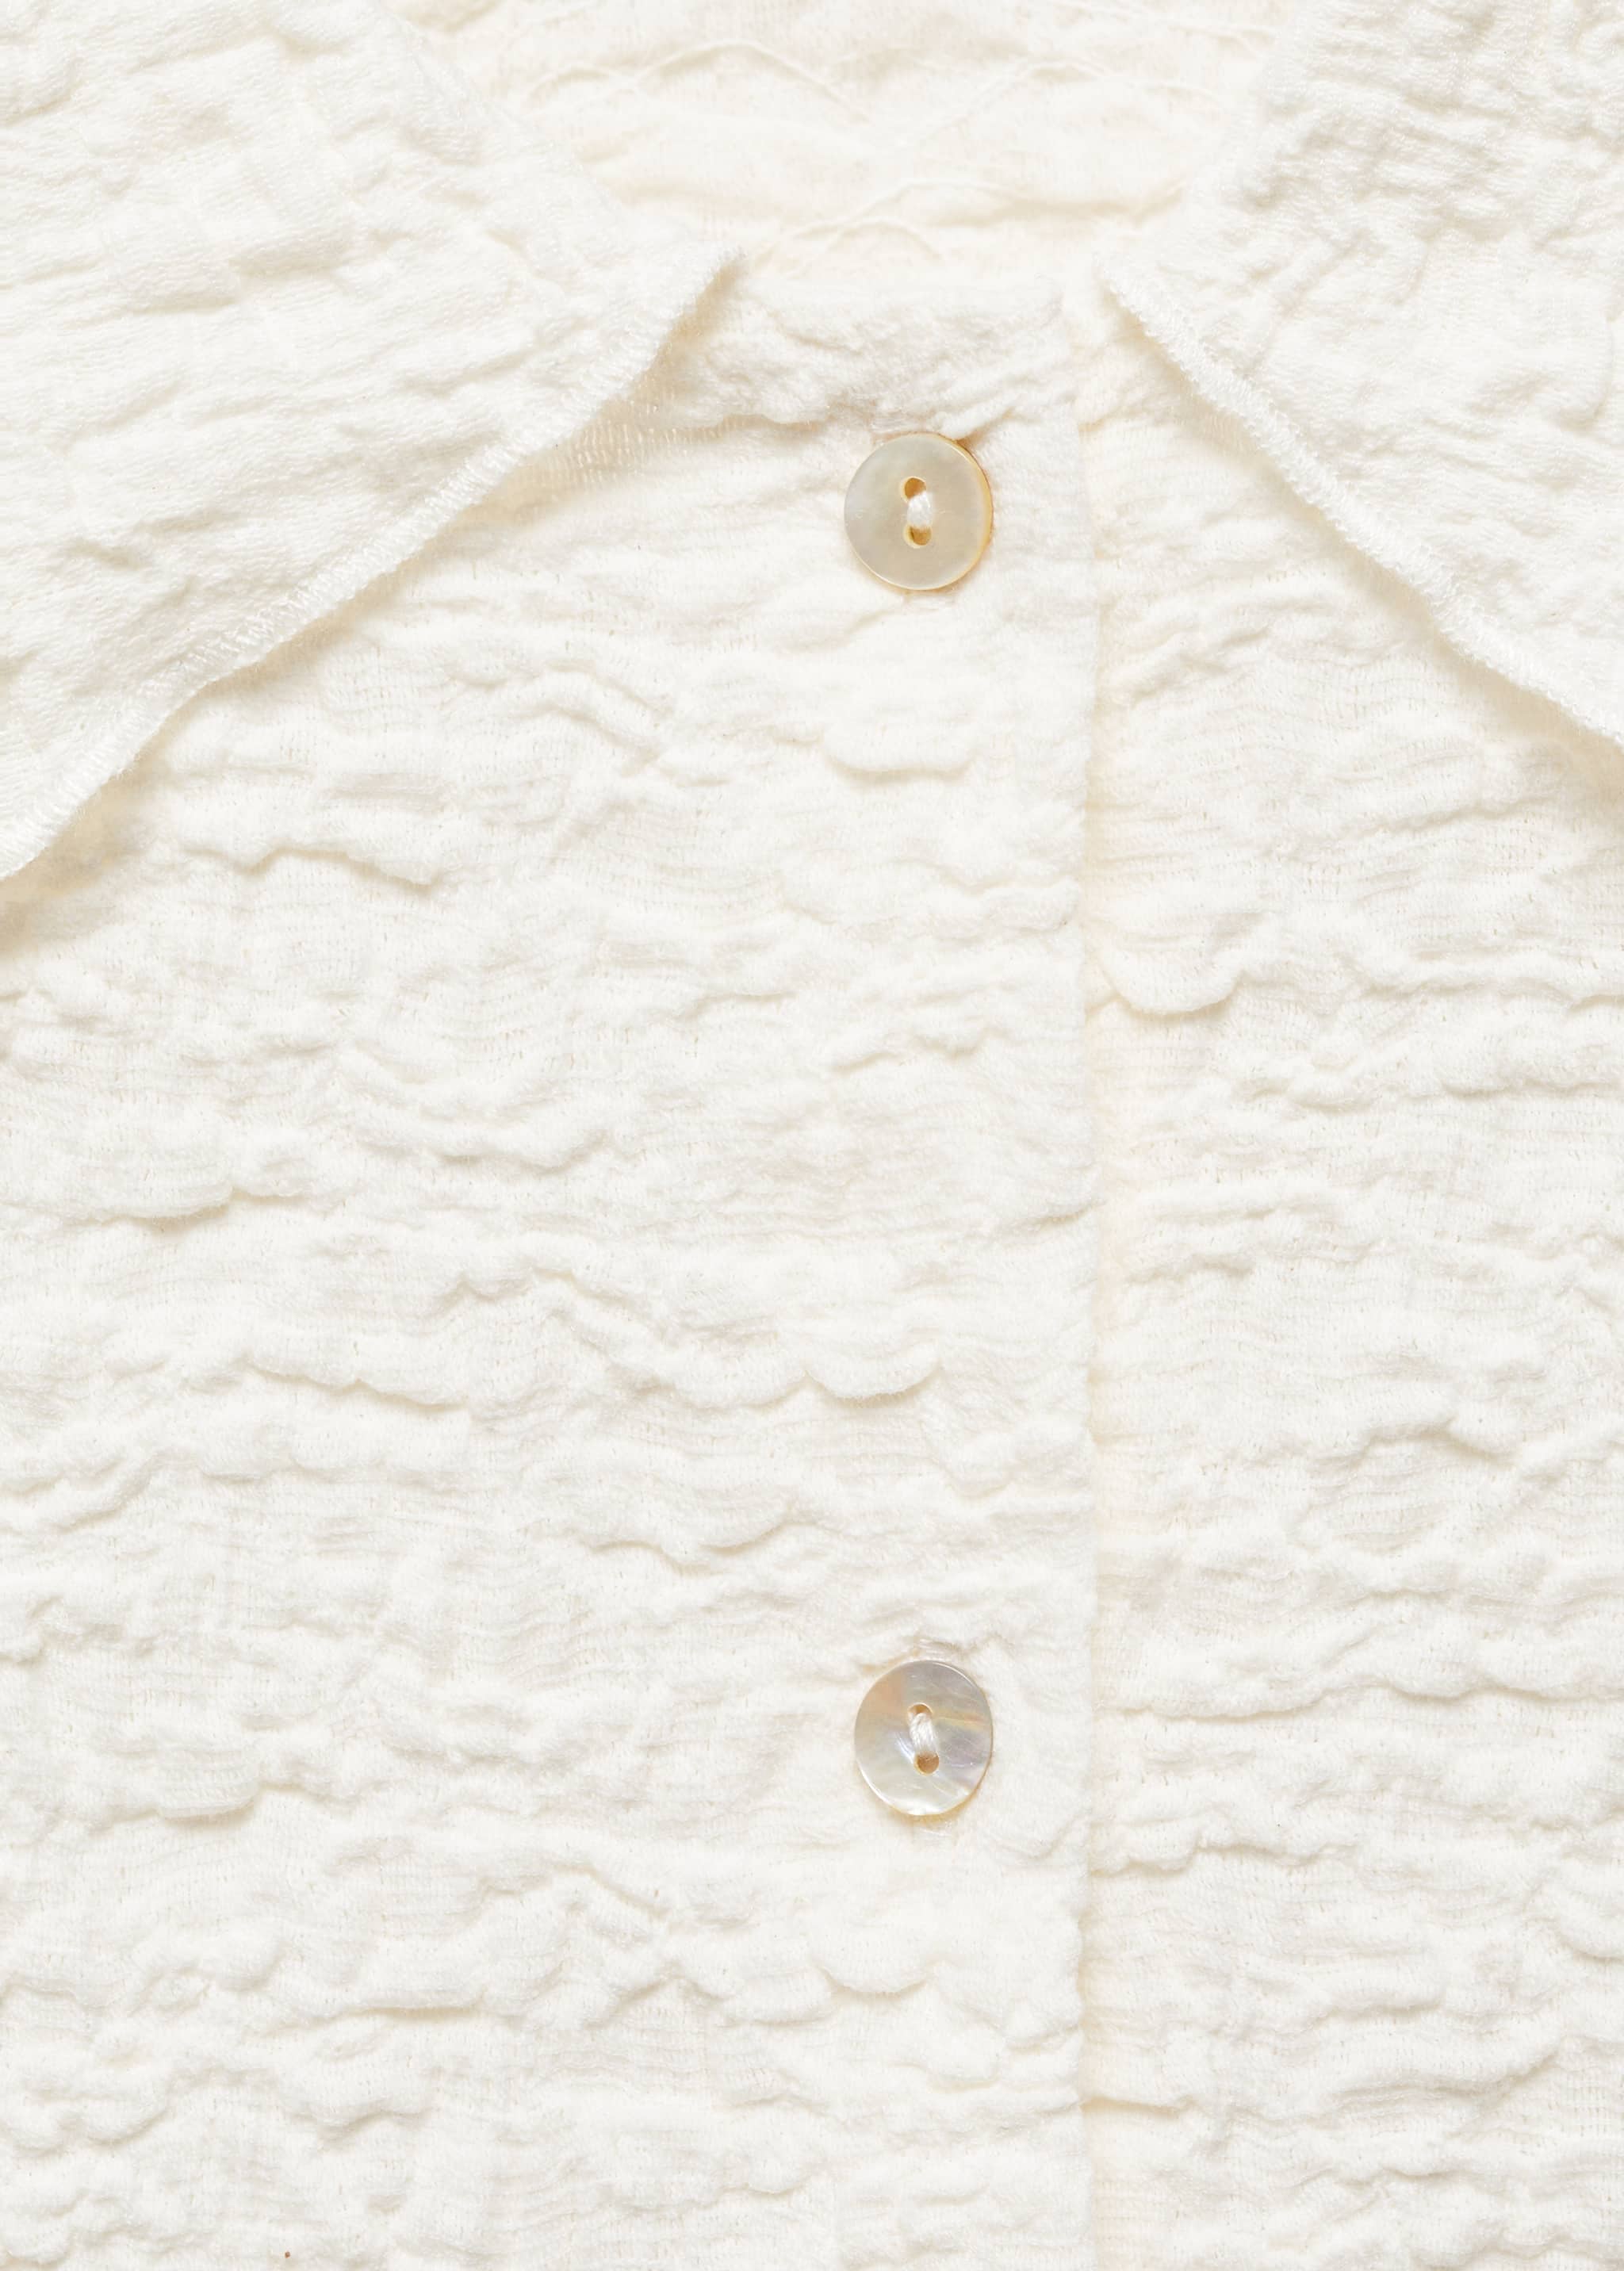 Textured cotton T-shirt - Details of the article 8